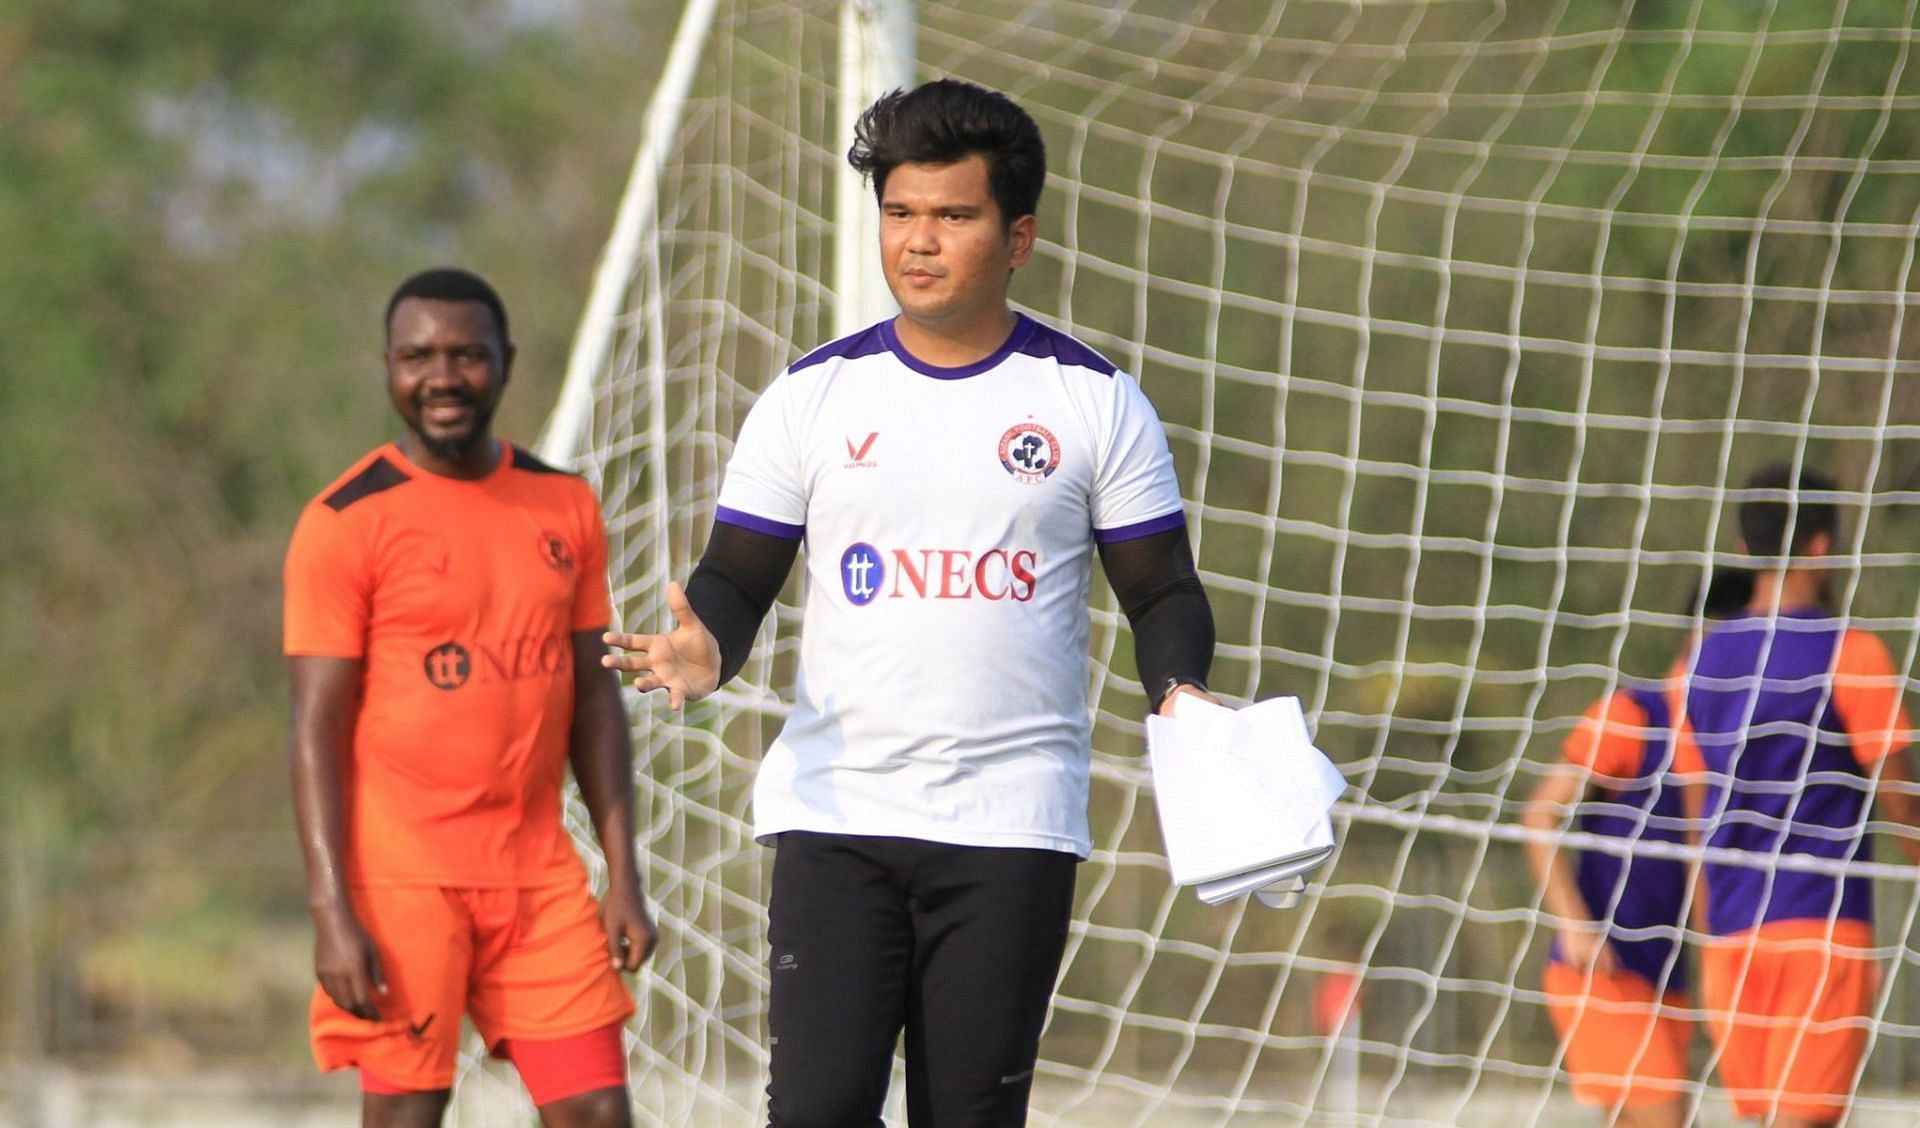 Aizawl FC head coach Yan Law looking on as his players train. (Image Courtesy: ILeagueOfficial)